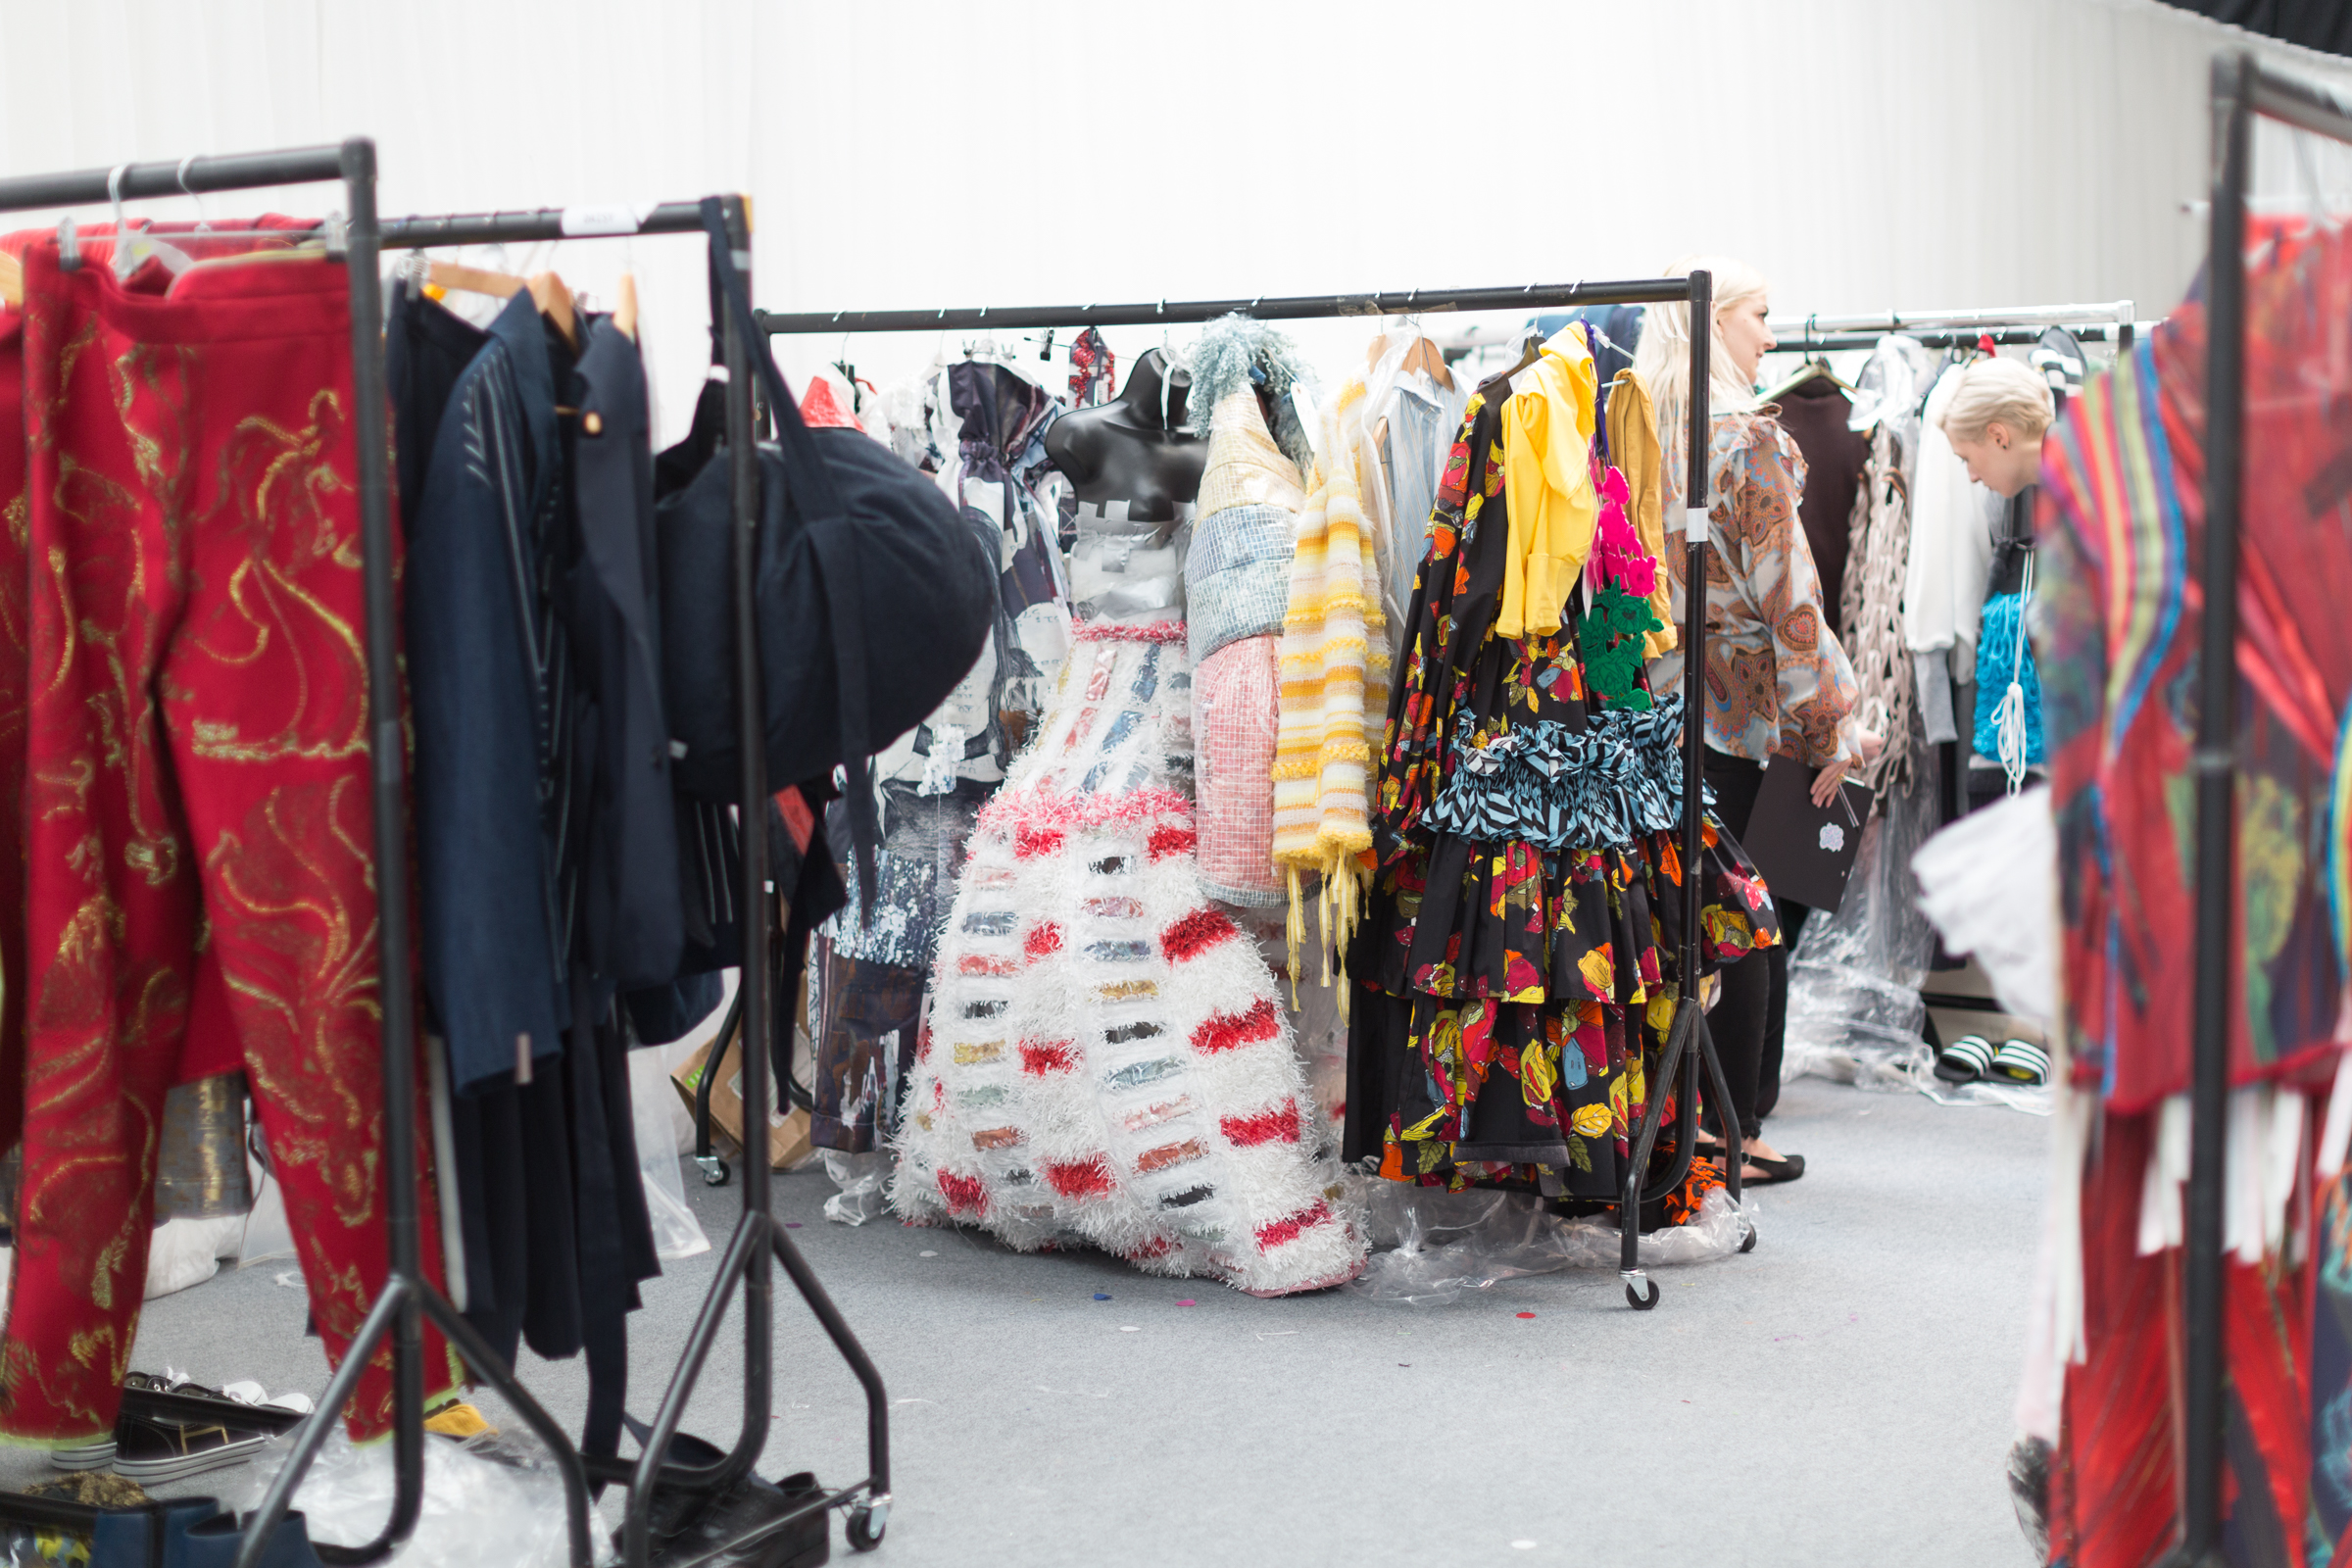 07-06 Backstage Best of GFW Images by Kathrin Werner 001.jpg